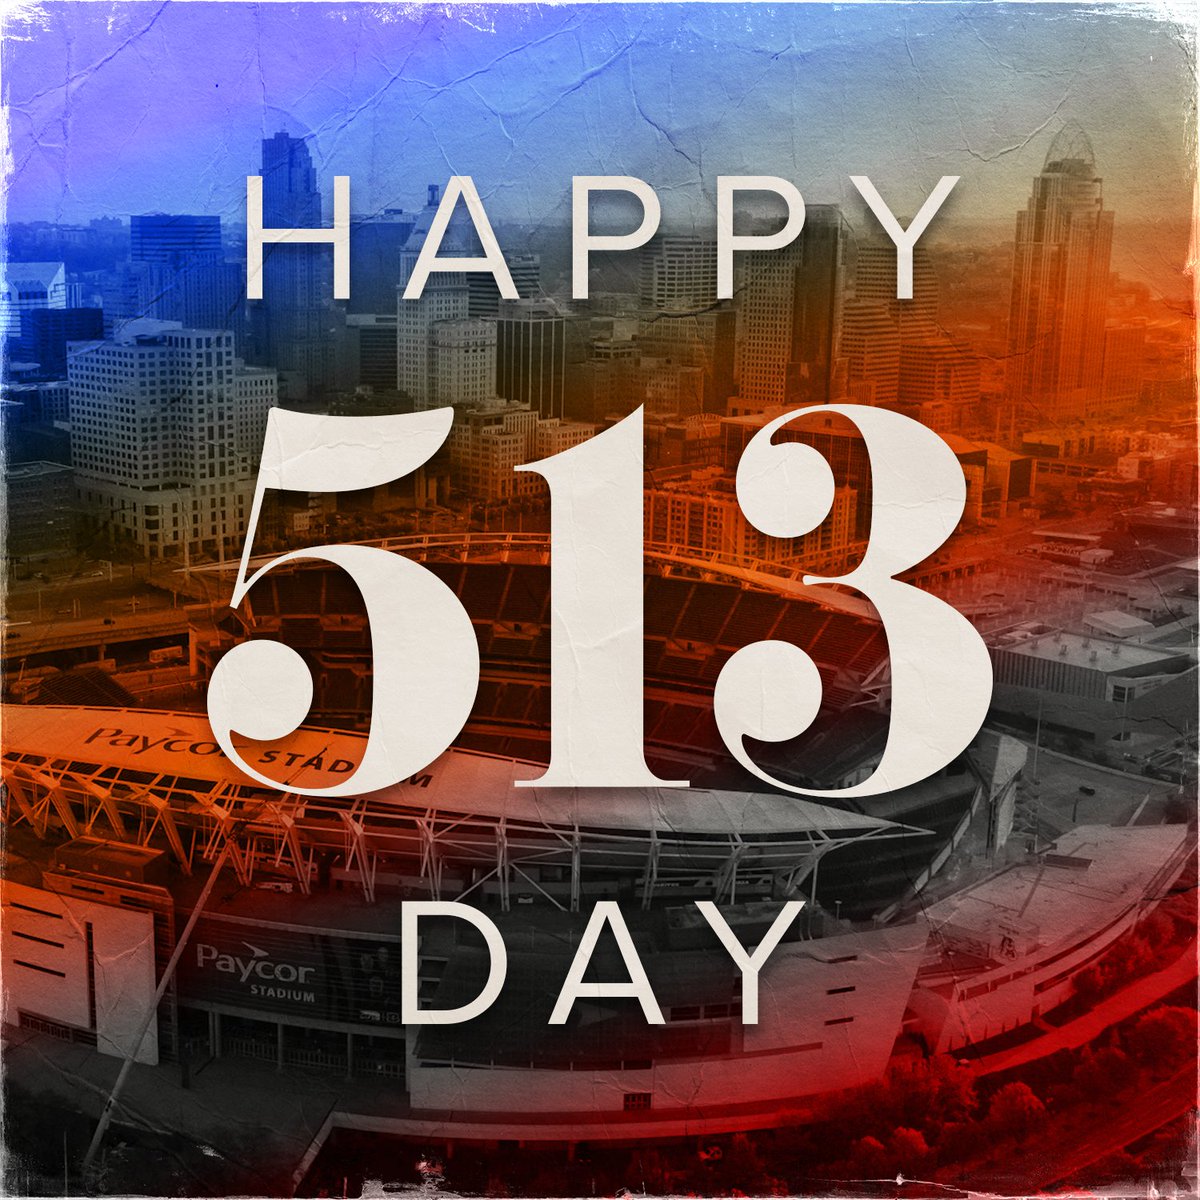 Happy #513Day! 🎉 Proud to be part of the 513 community here in Southwest Ohio. Let's celebrate our area's rich culture and history together! #CincyPride #RabbitLaserUSA